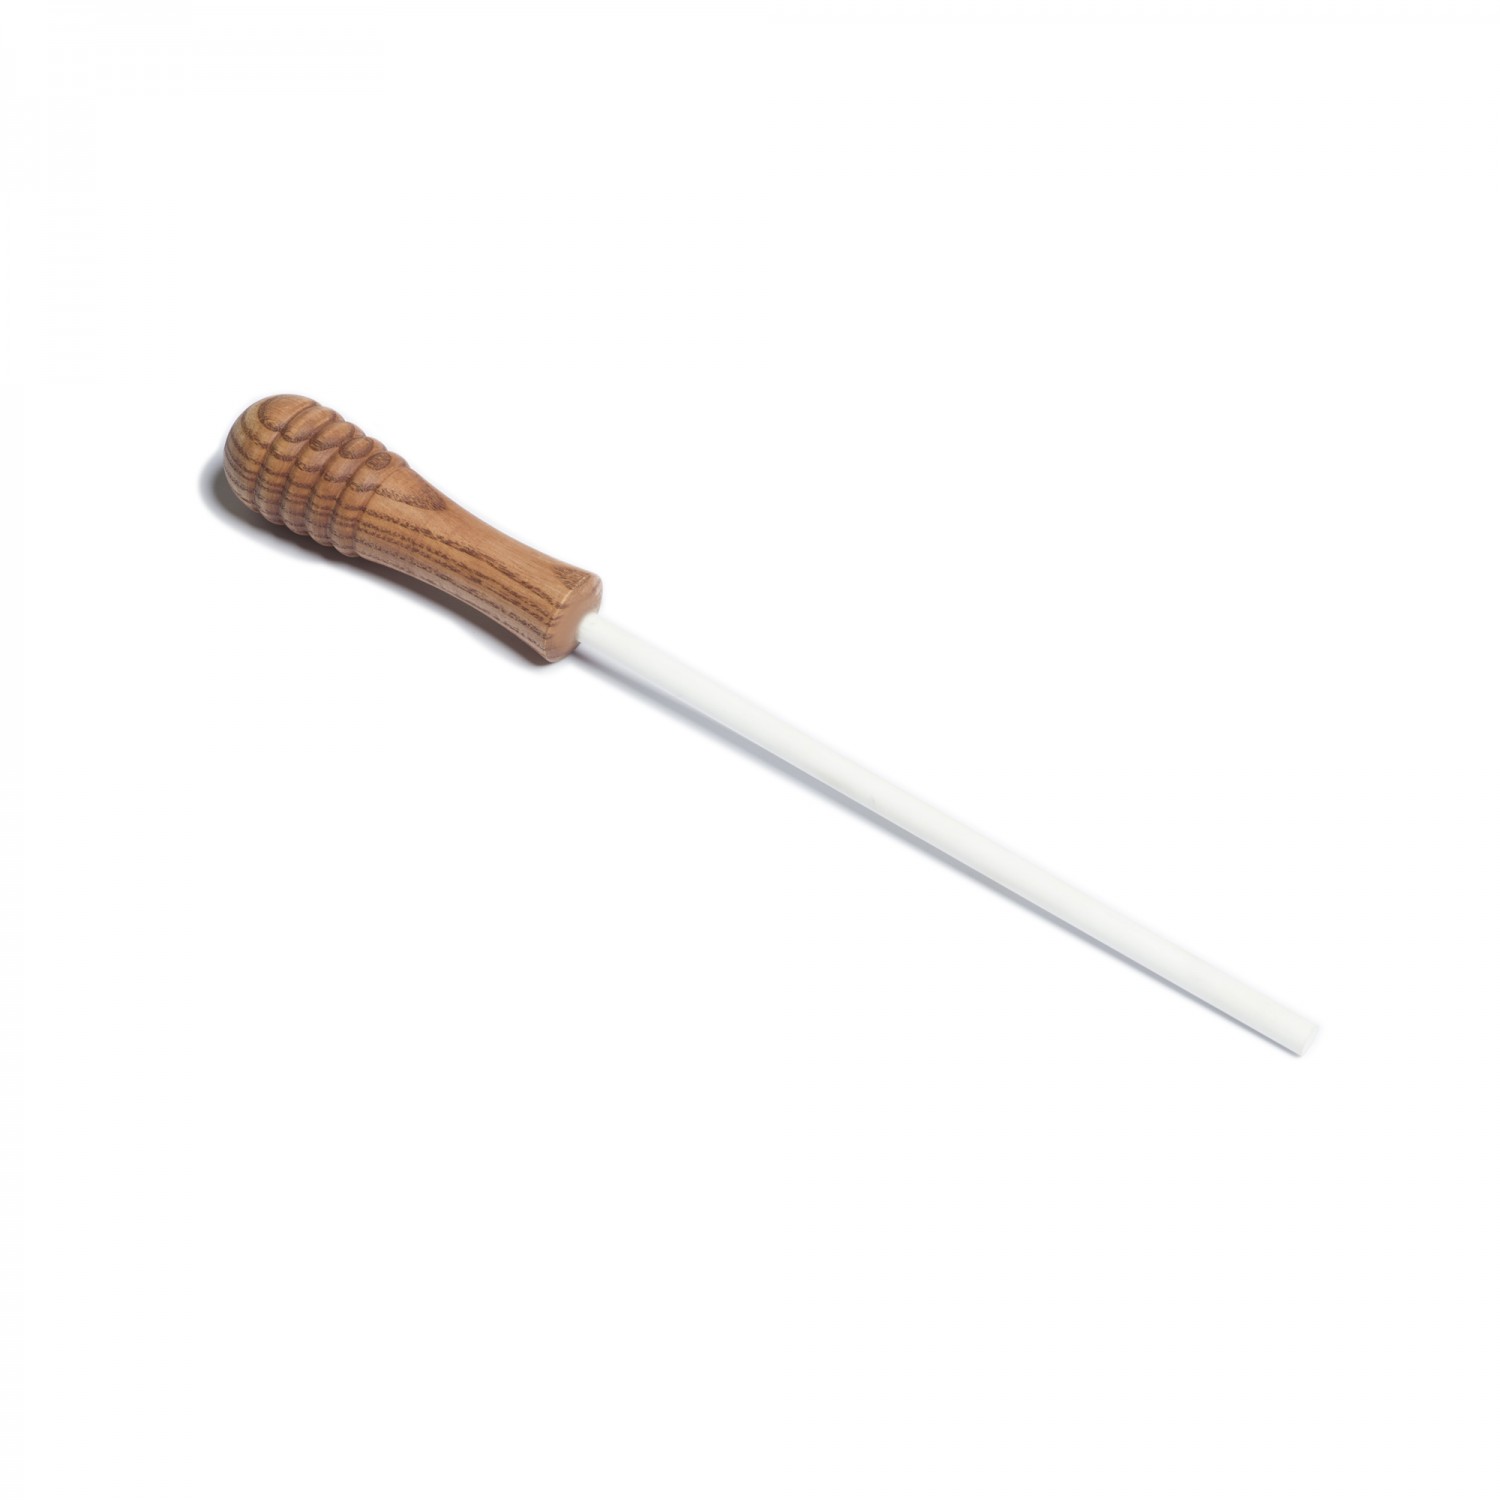 8" Fine Honing Rod with Natural Handle